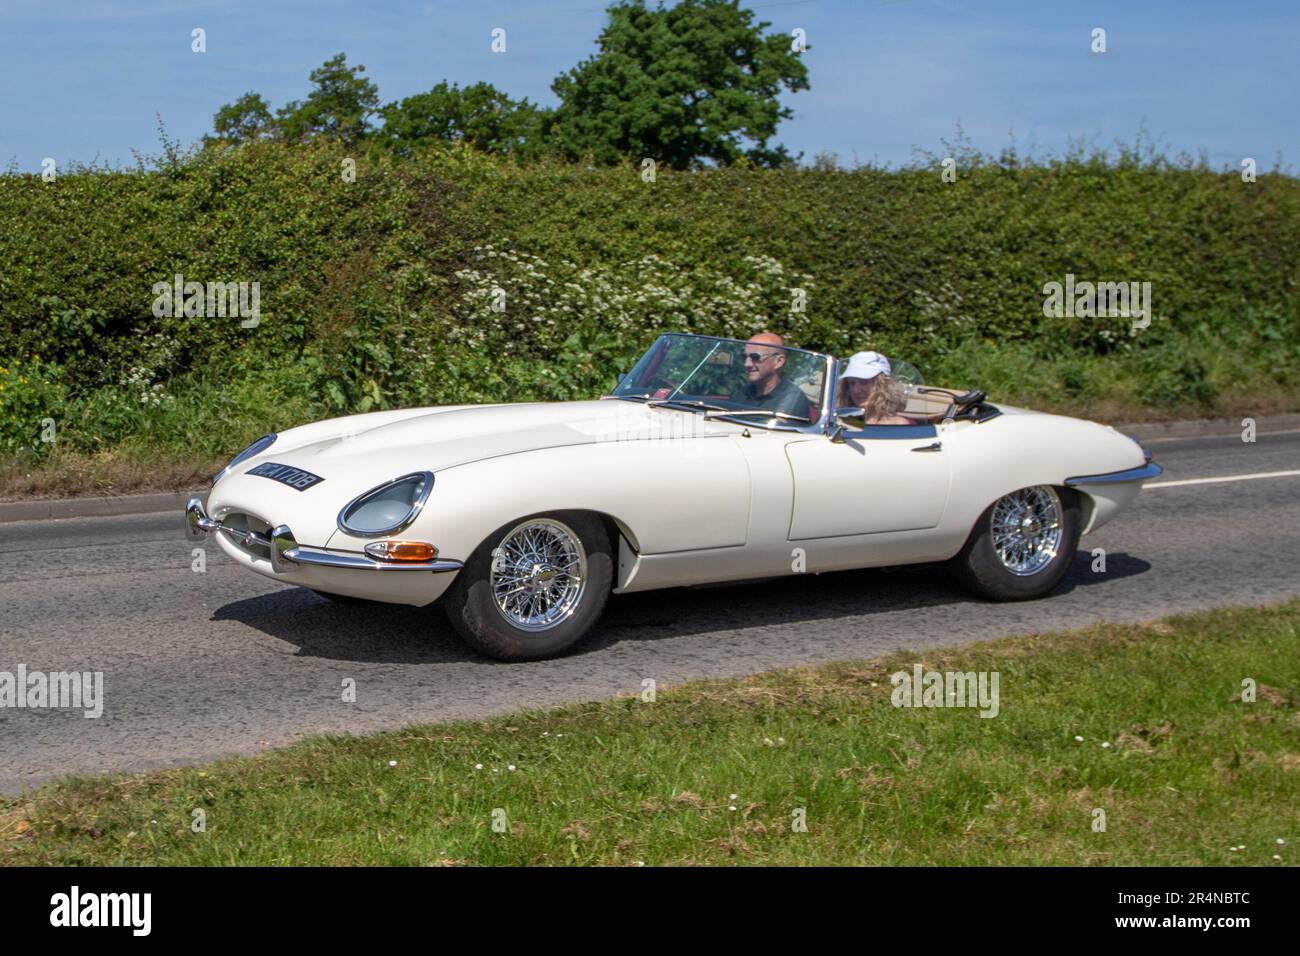 1963 60s White sixties British Jaguar E type convertible, Petrol 3781 cc; at the Cheshire Classic Car & Motorcycle Show, Stock Photo